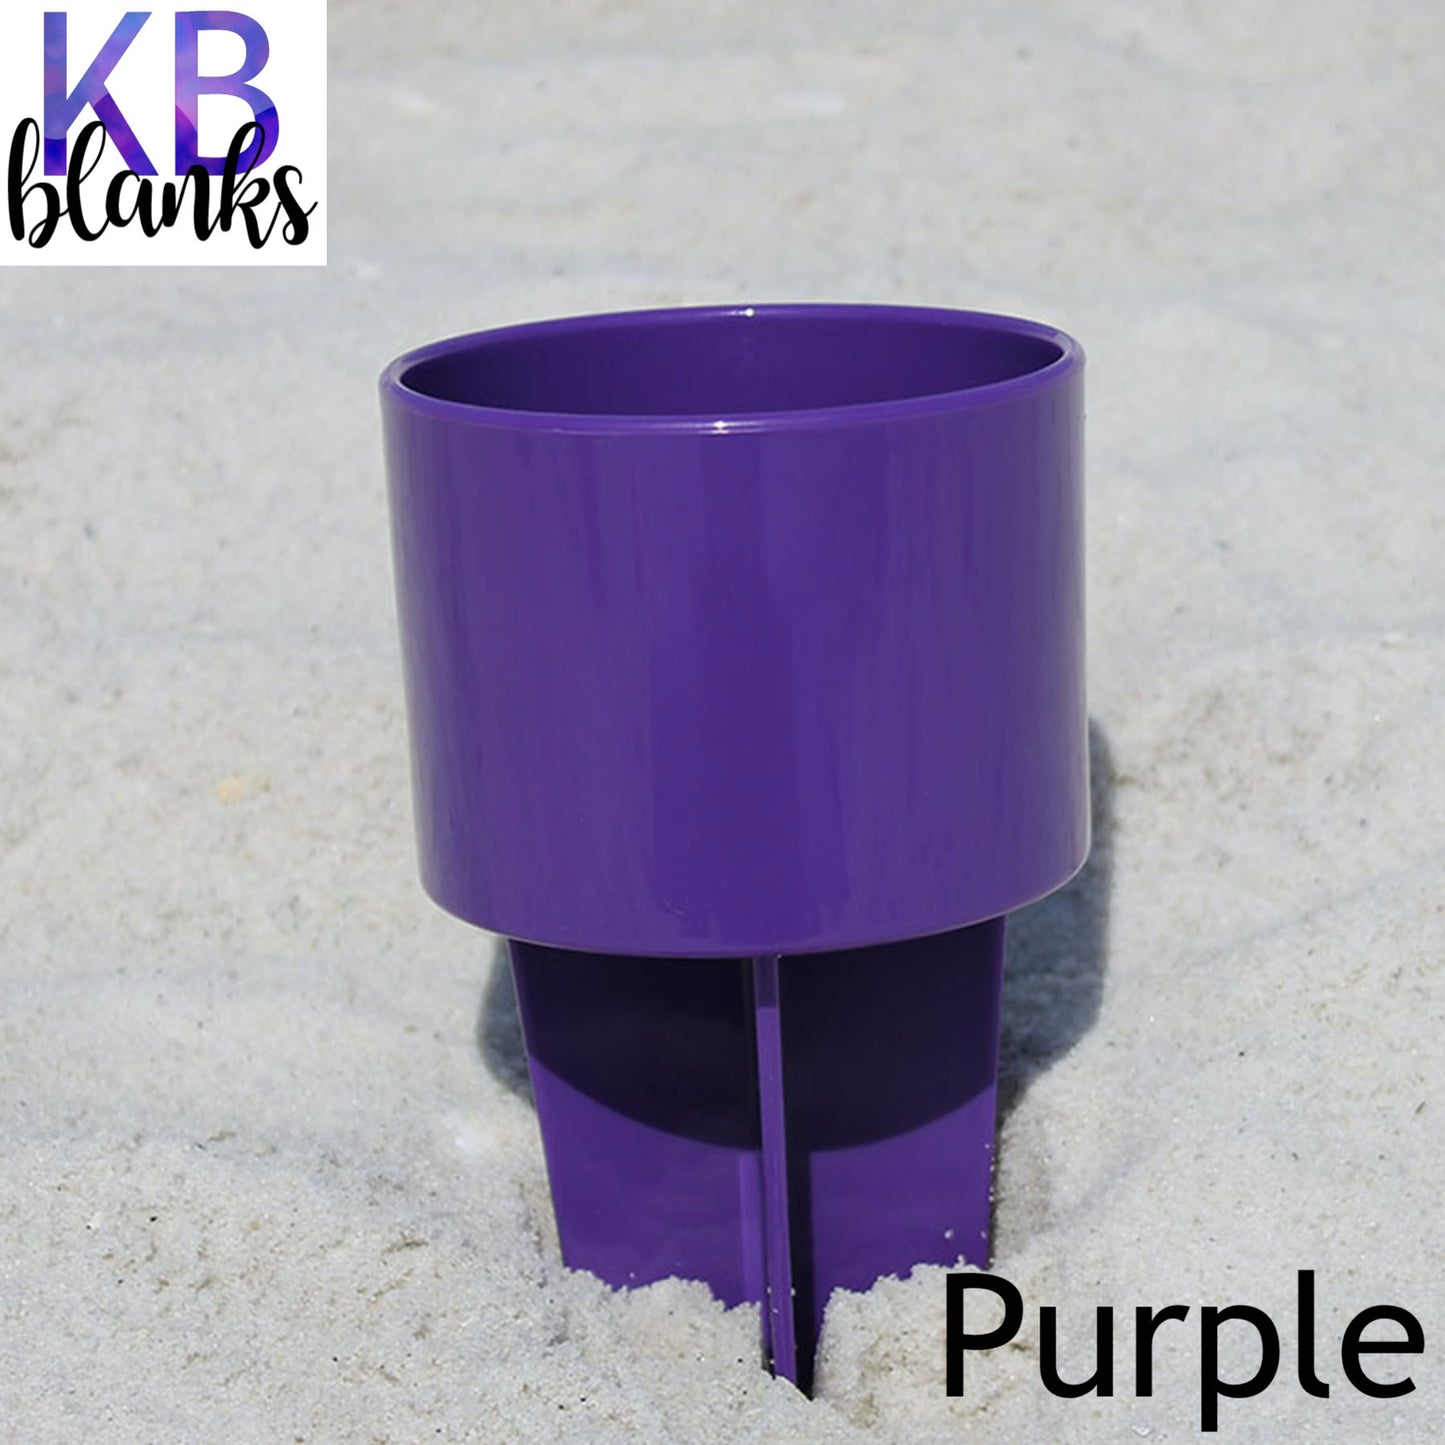 Spikers (Cup Holders For Beach)